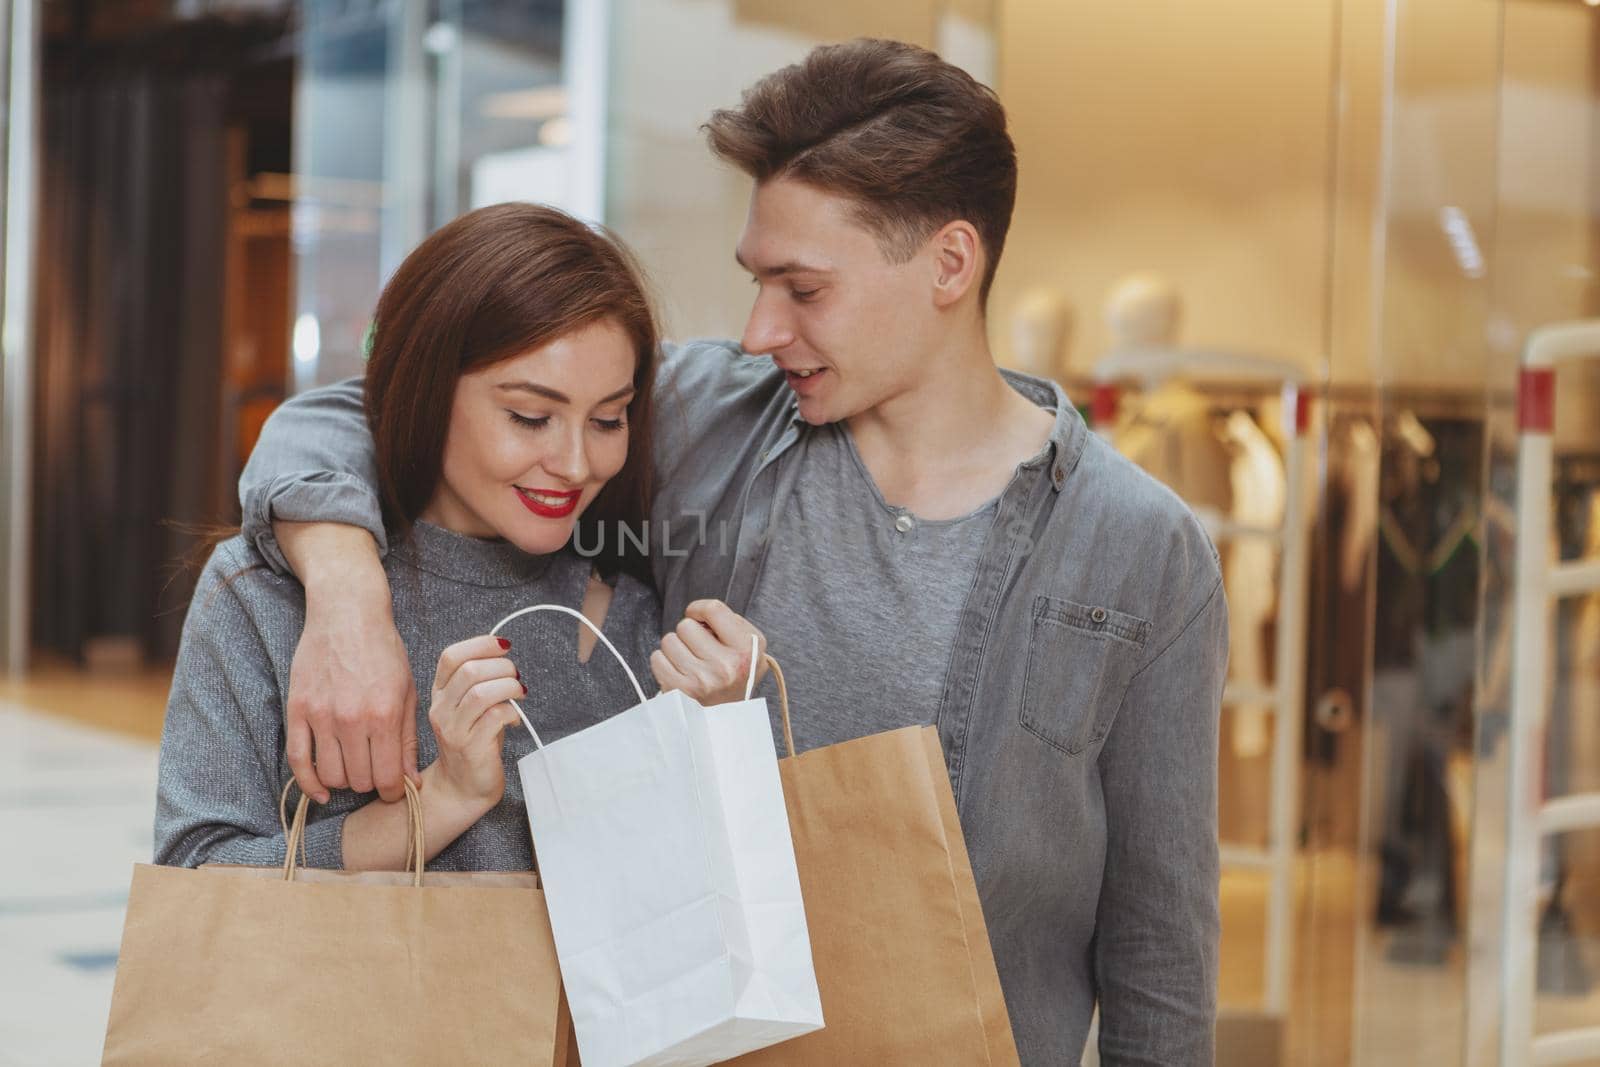 Handsome man smiling at his beautiful girlfriend while she is looking into a shopping bag. Adorable couple shopping together at the mall. Buying presents, celebrating anniversary concept